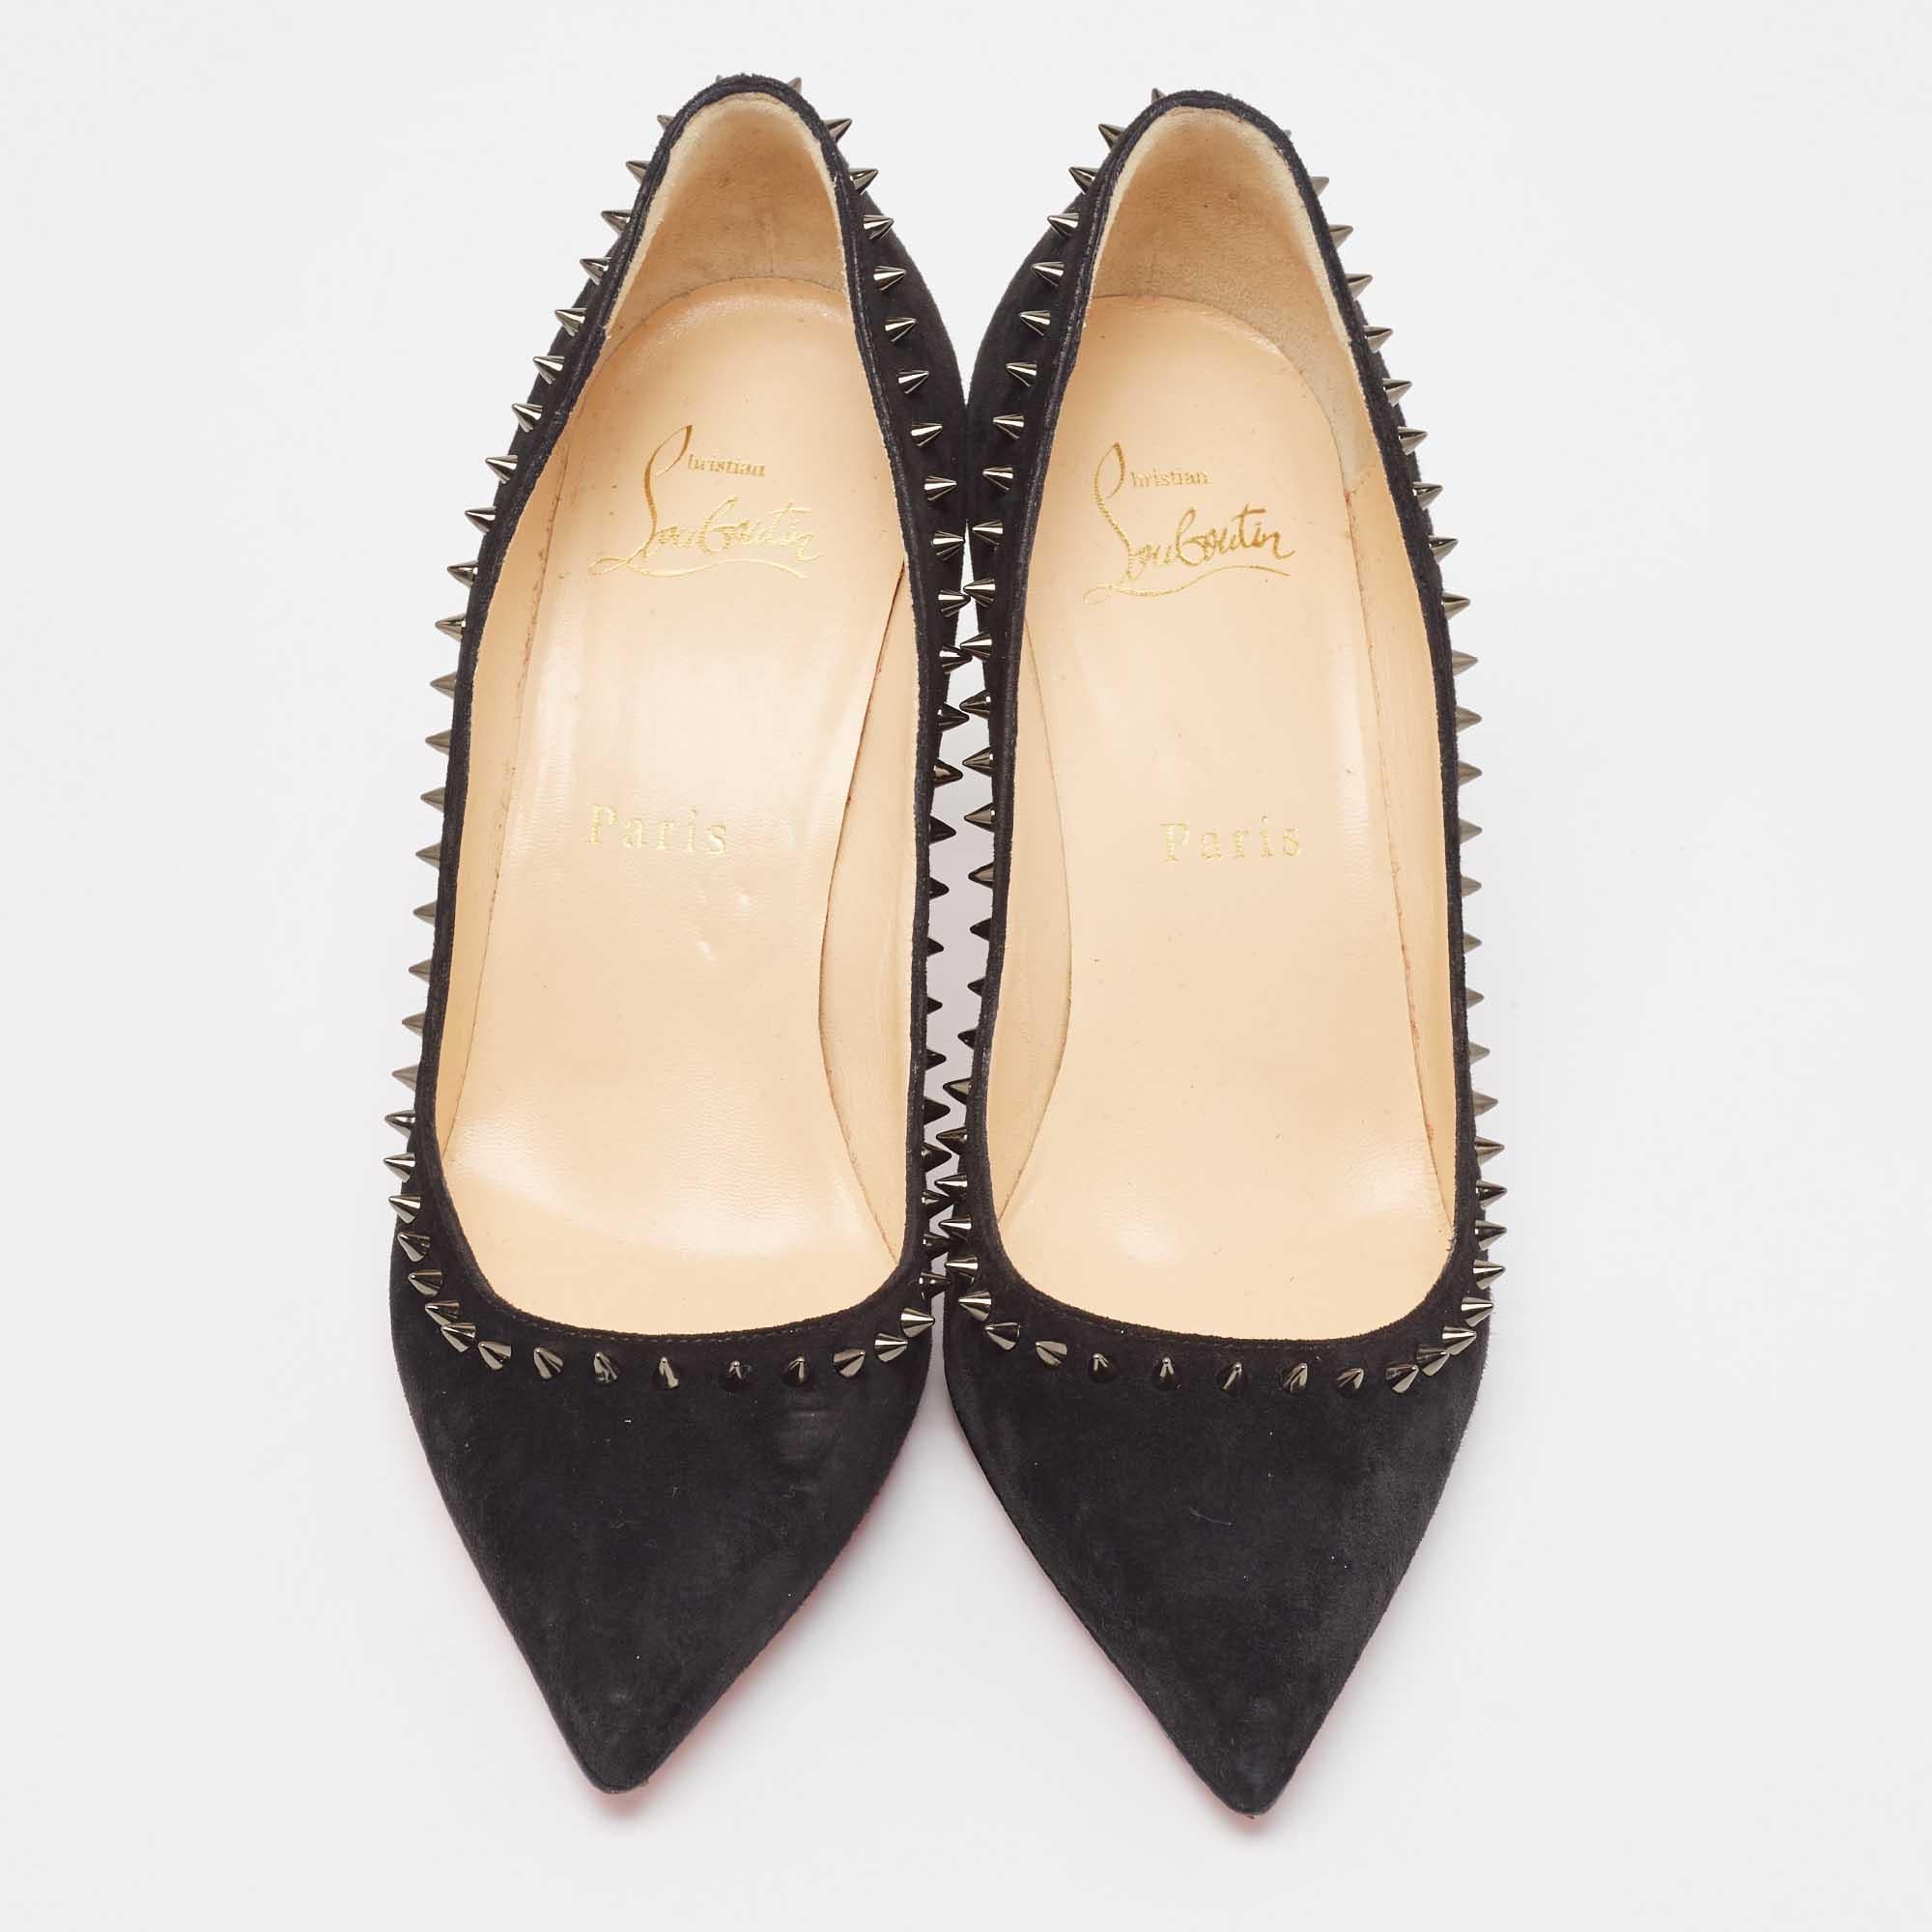 Women's Christian Louboutin Black Suede Anjalina Pumps Size 35.5 For Sale